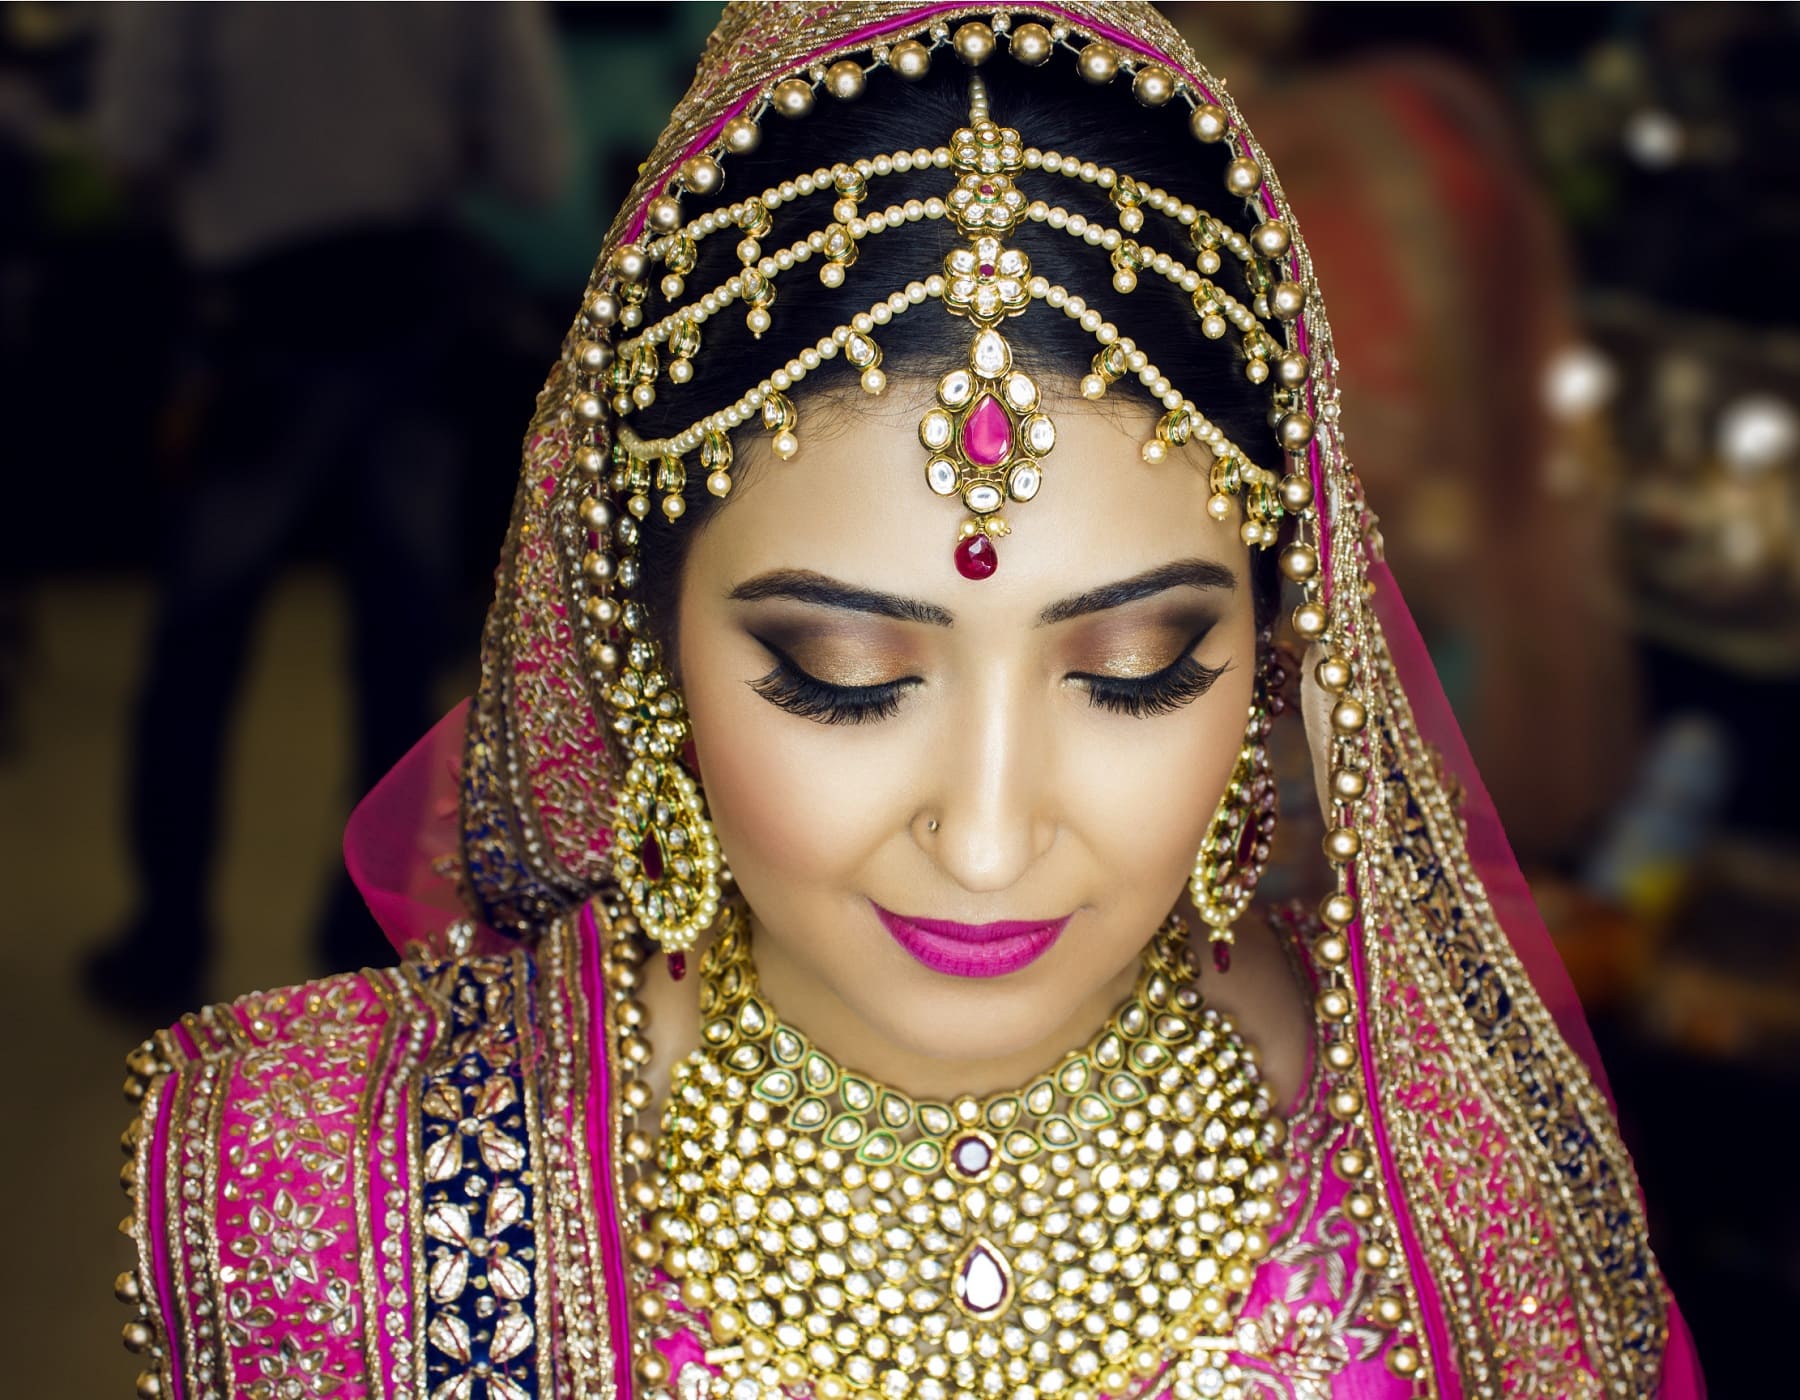 22 Eye Makeup For Brides: Shimmery, Starry, Glittering and Seducing Wedding Eye Makeup